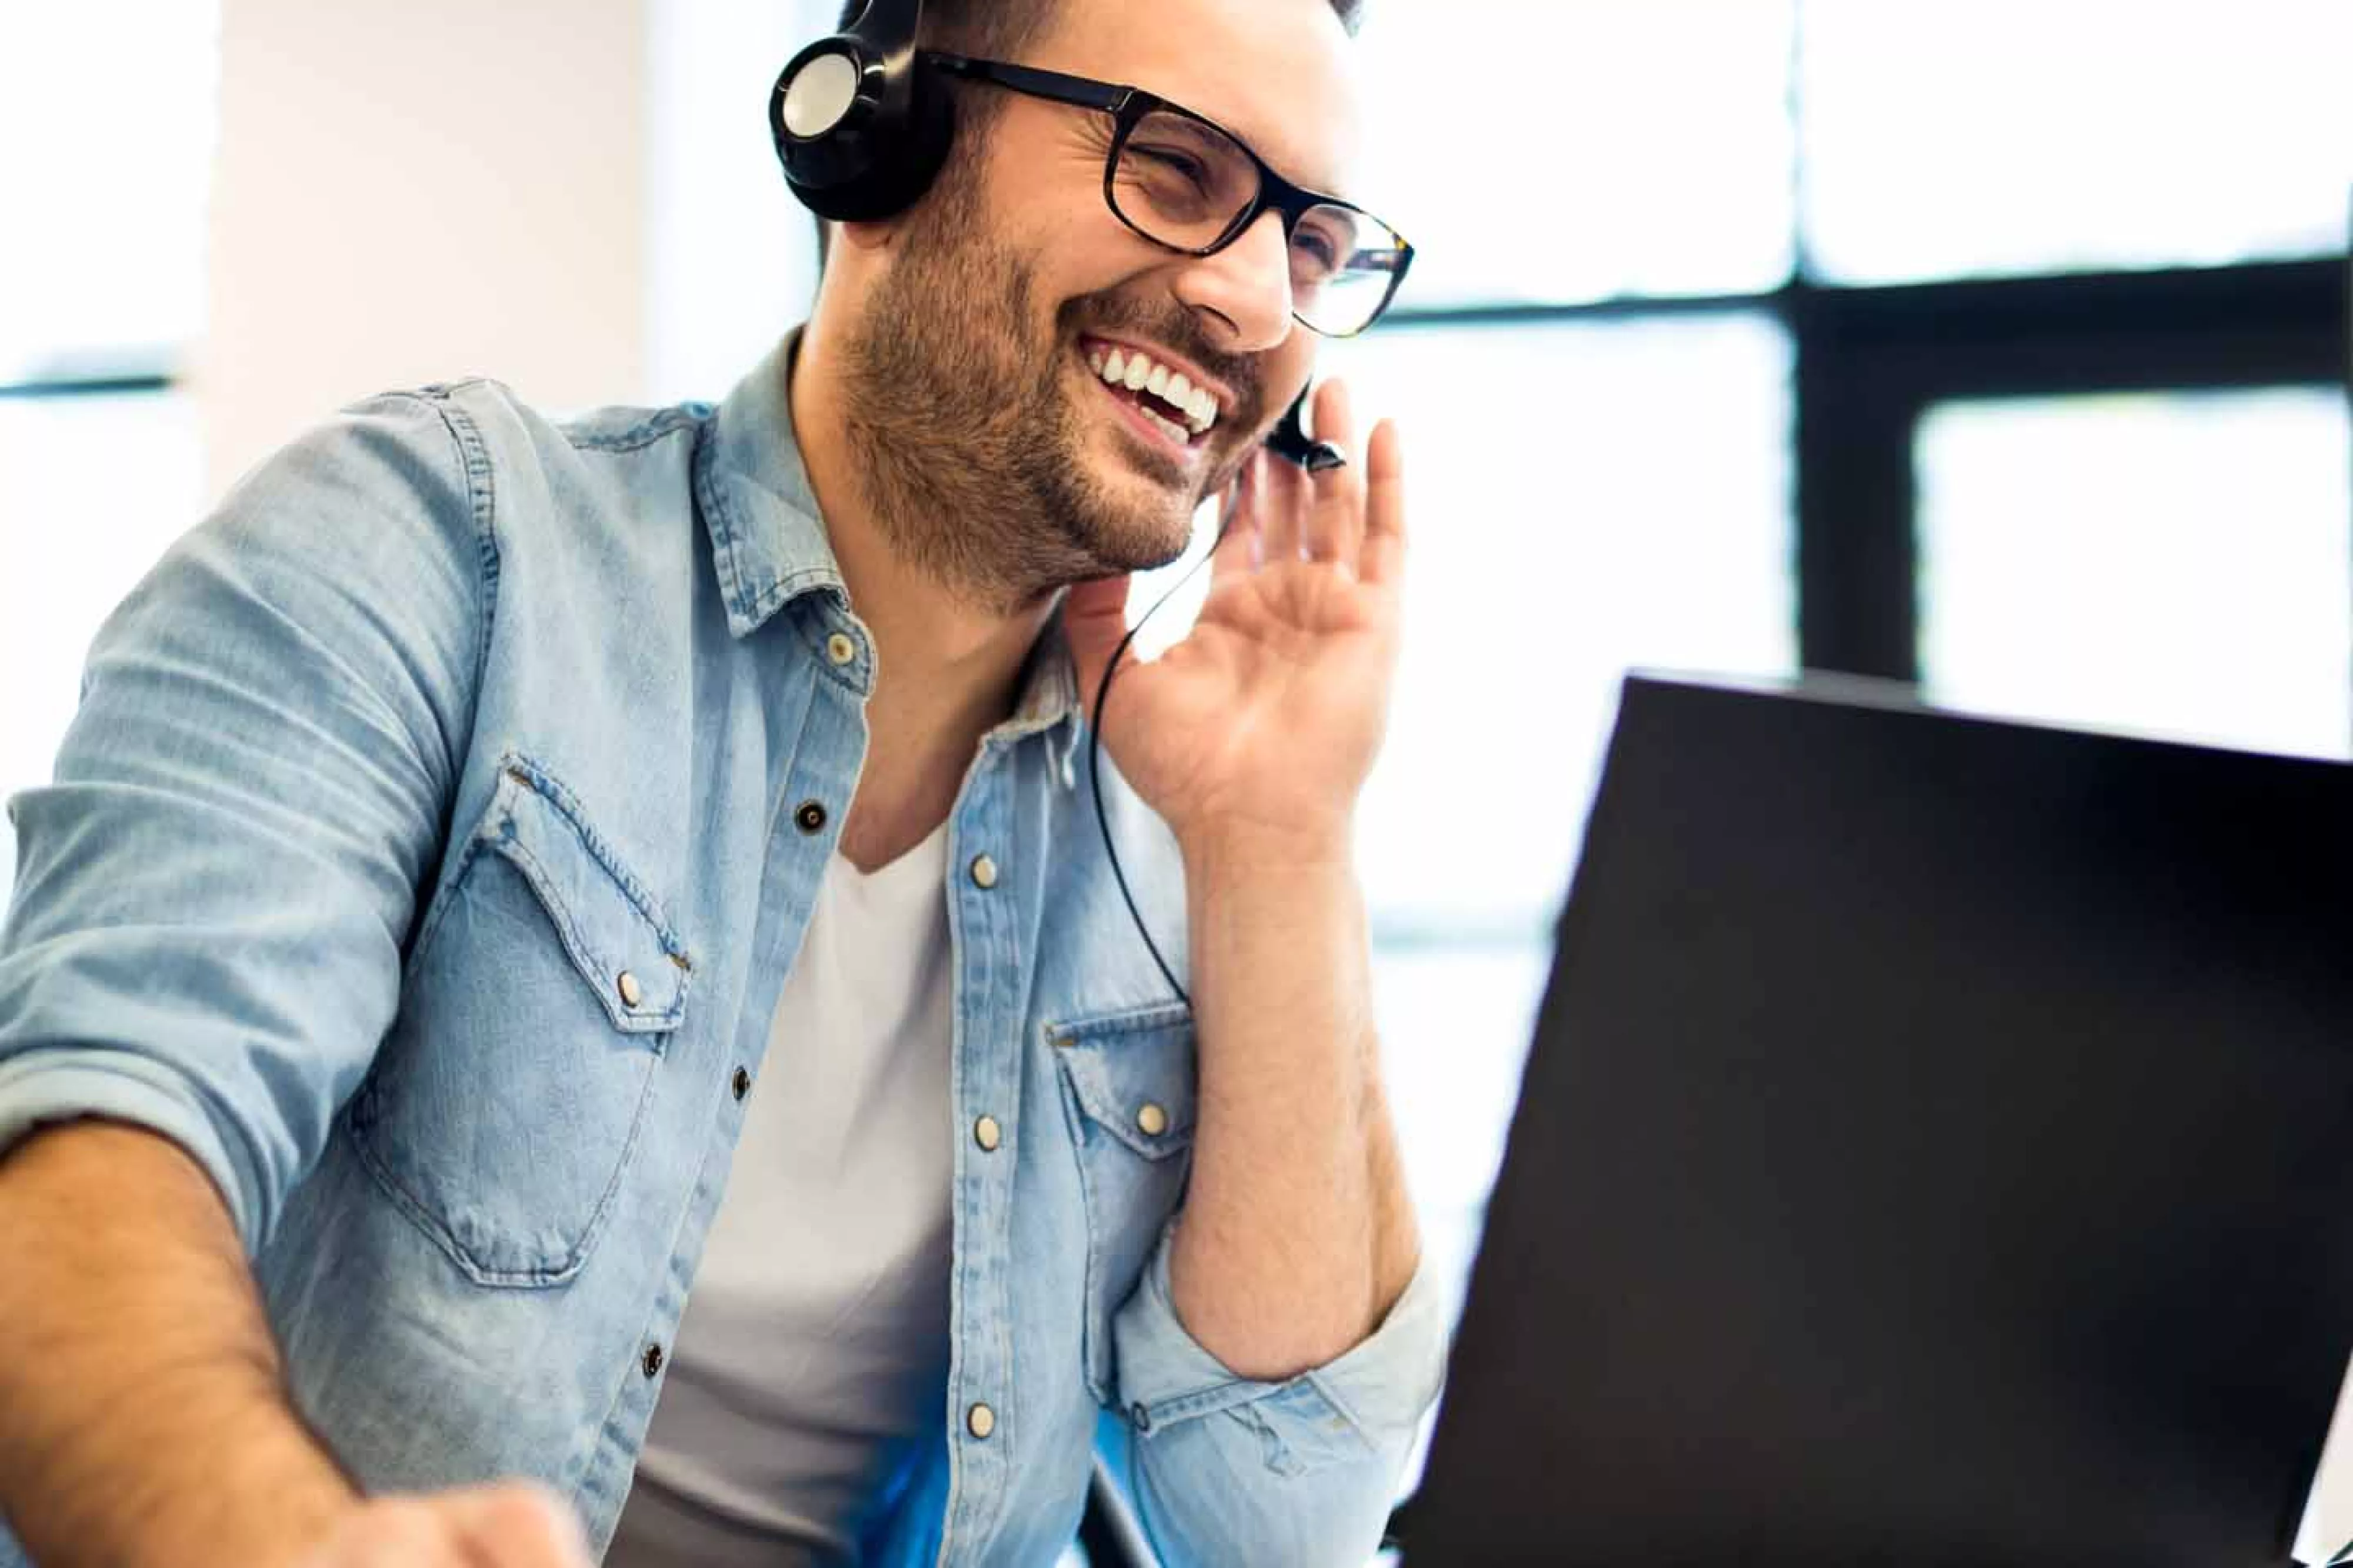 Smiling man with headset works at laptop